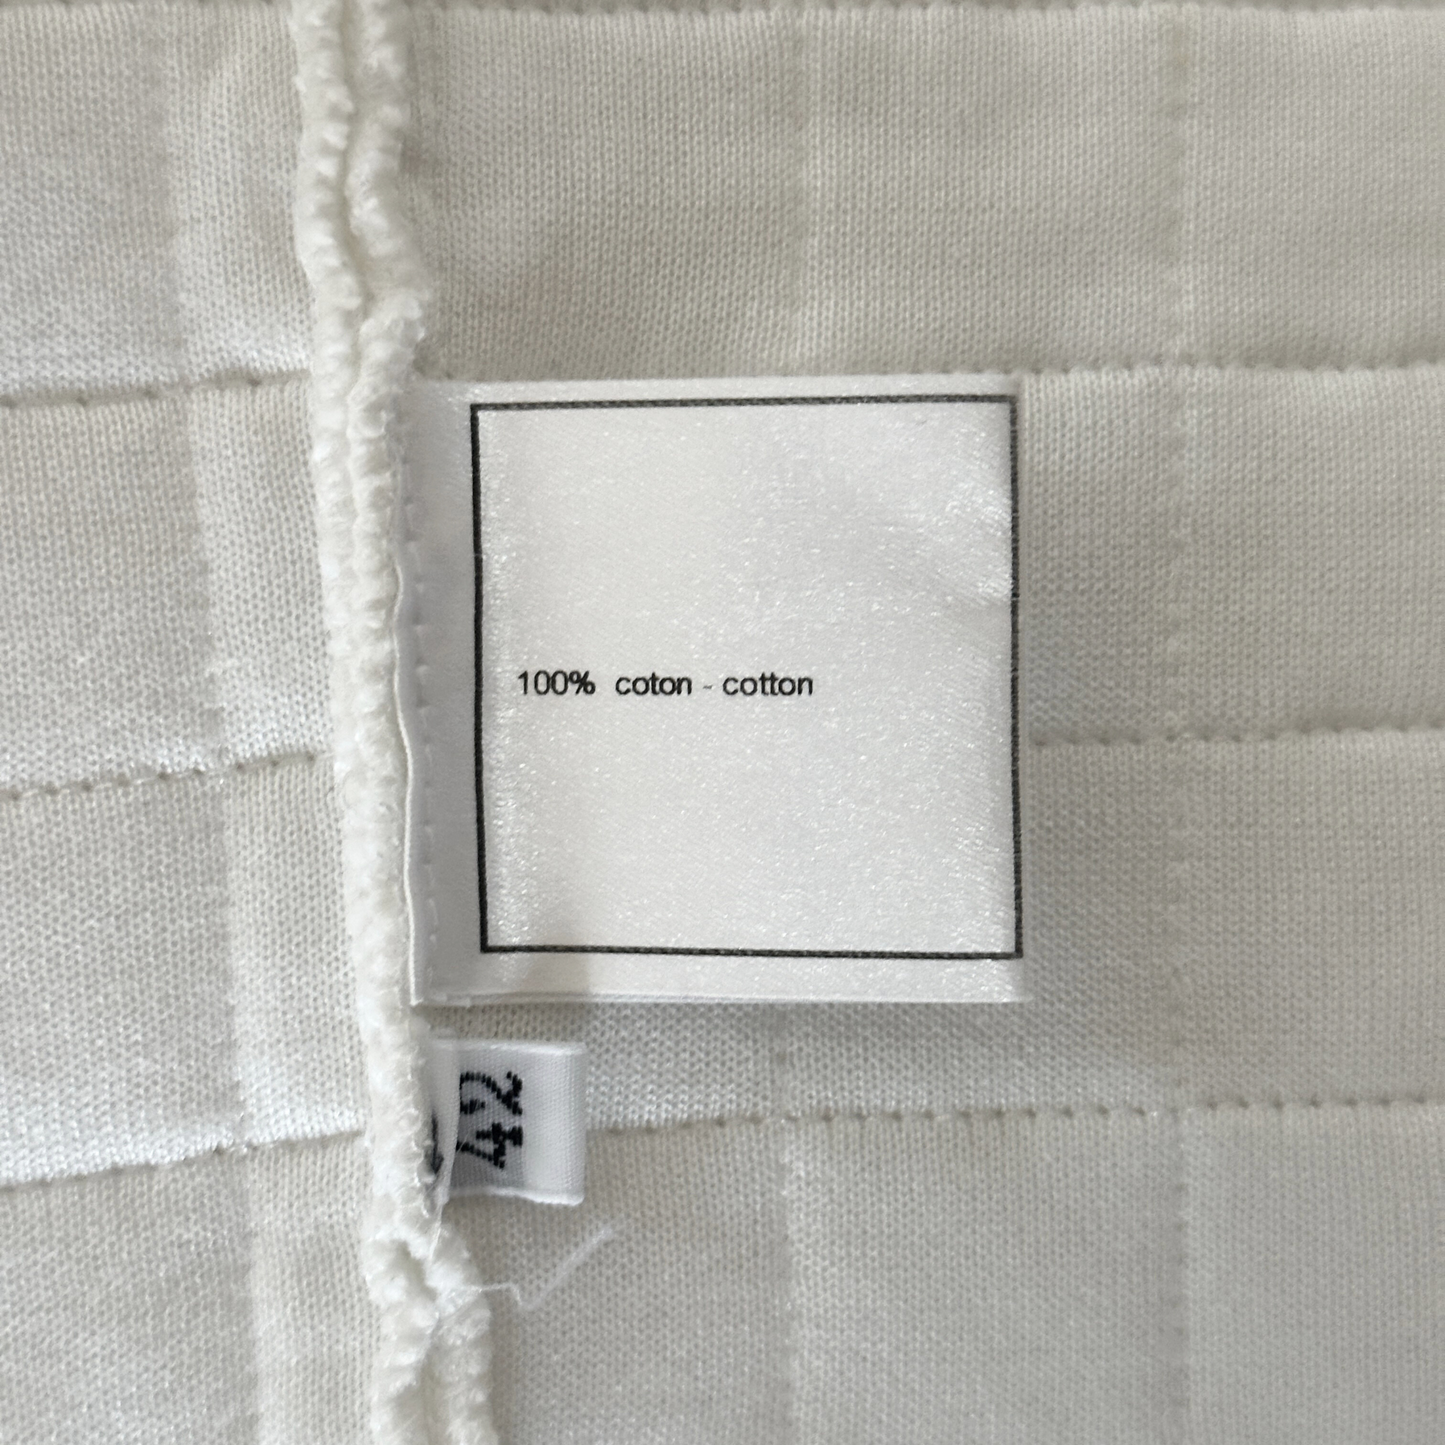 Chanel Chanel Top Bomuld - Tøj - Etoile Luxury Vintage